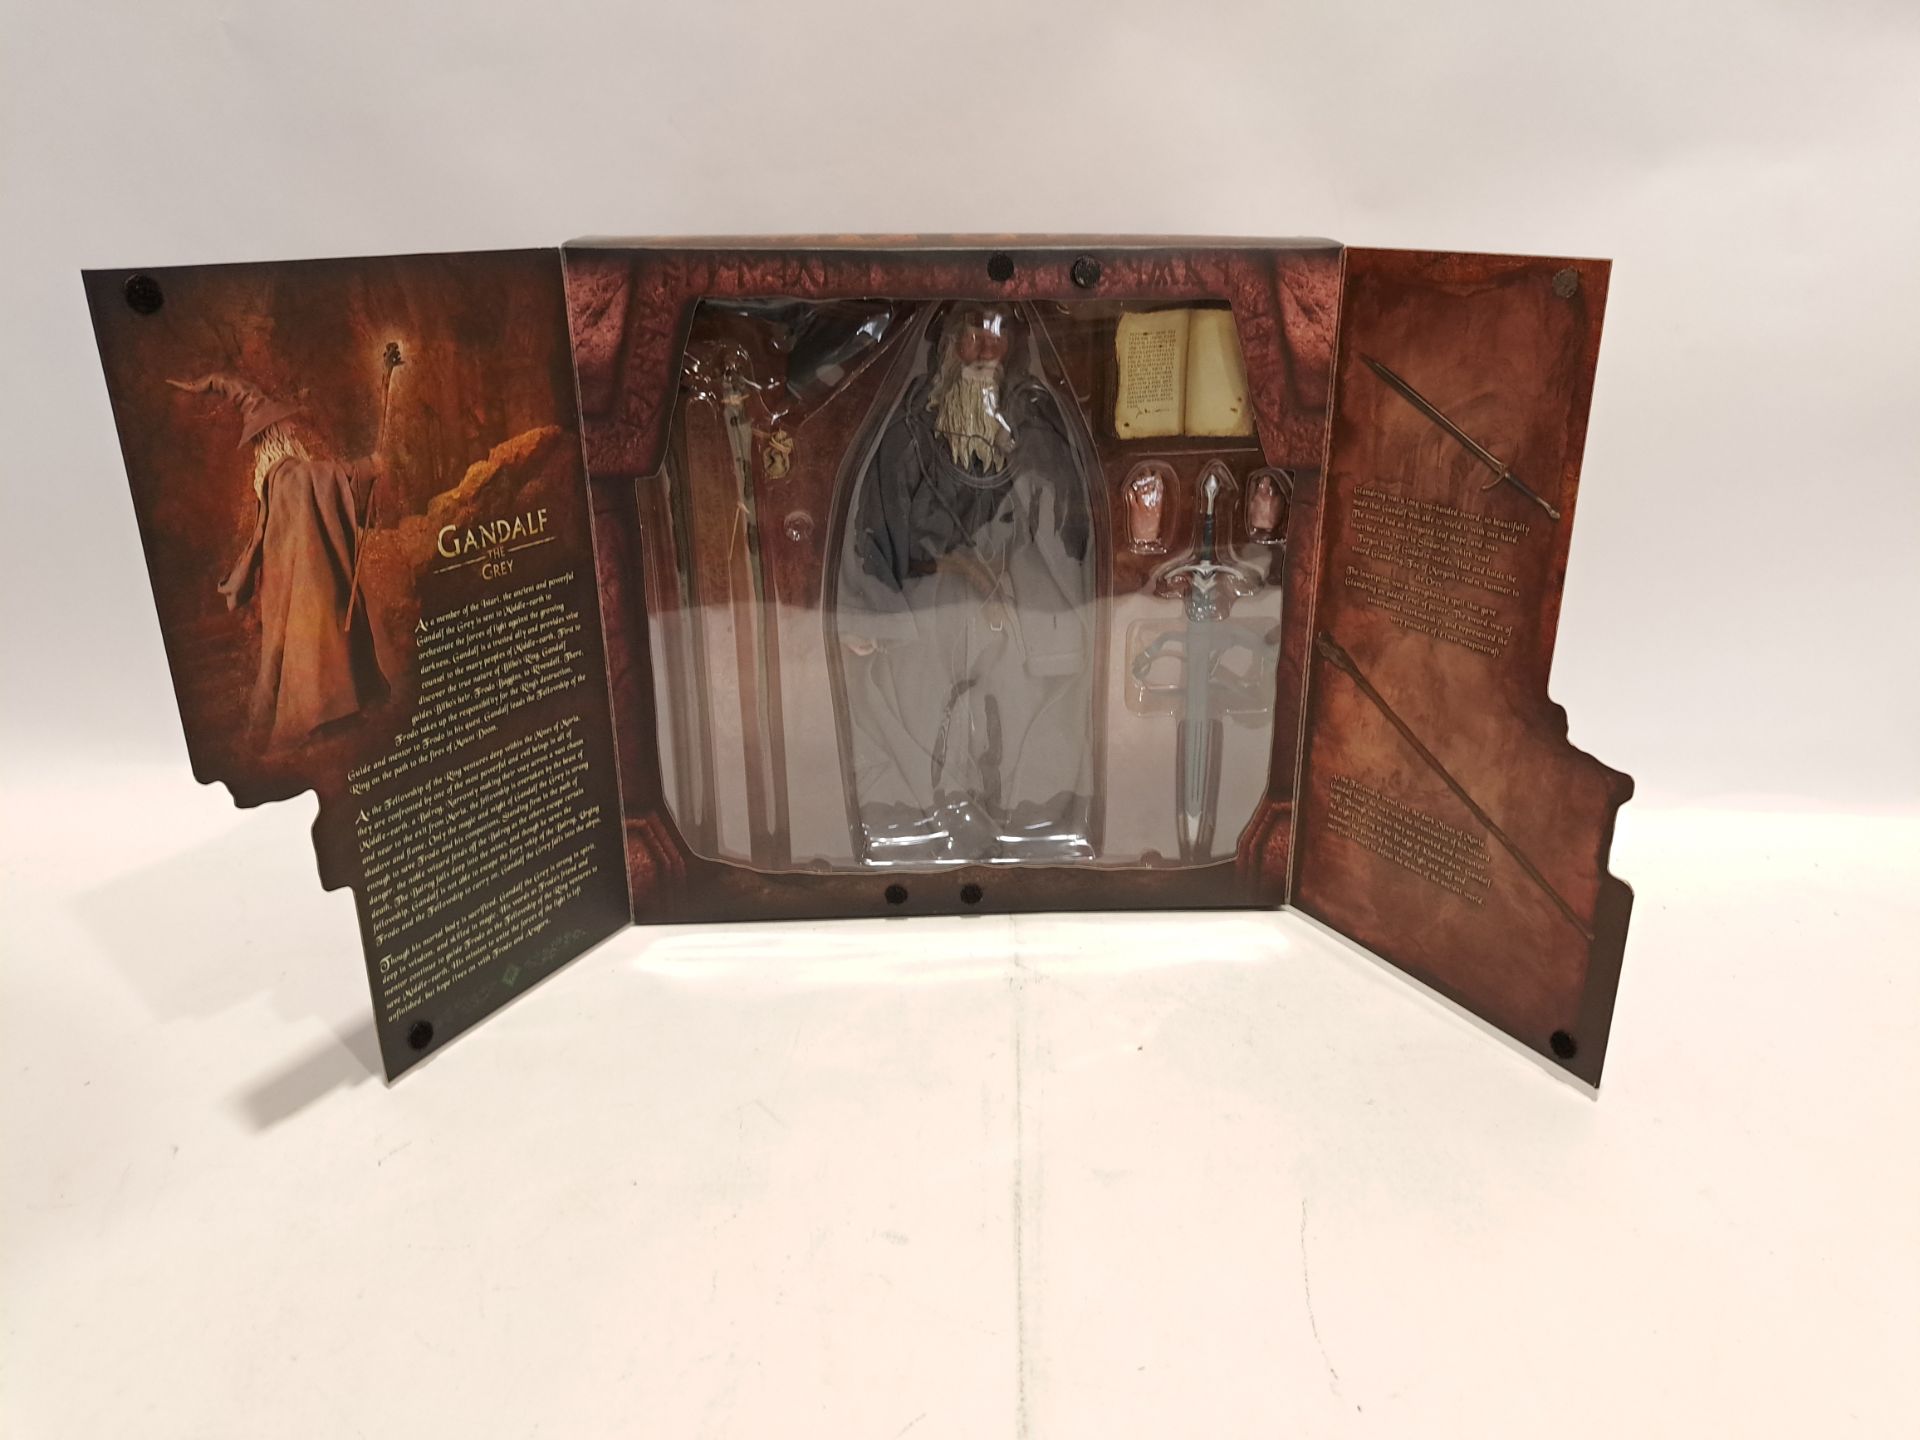 Sideshow Collectibles The Lord of the Rings The Fellowship of the Ring Gandalf the Grey 1:6 scale...